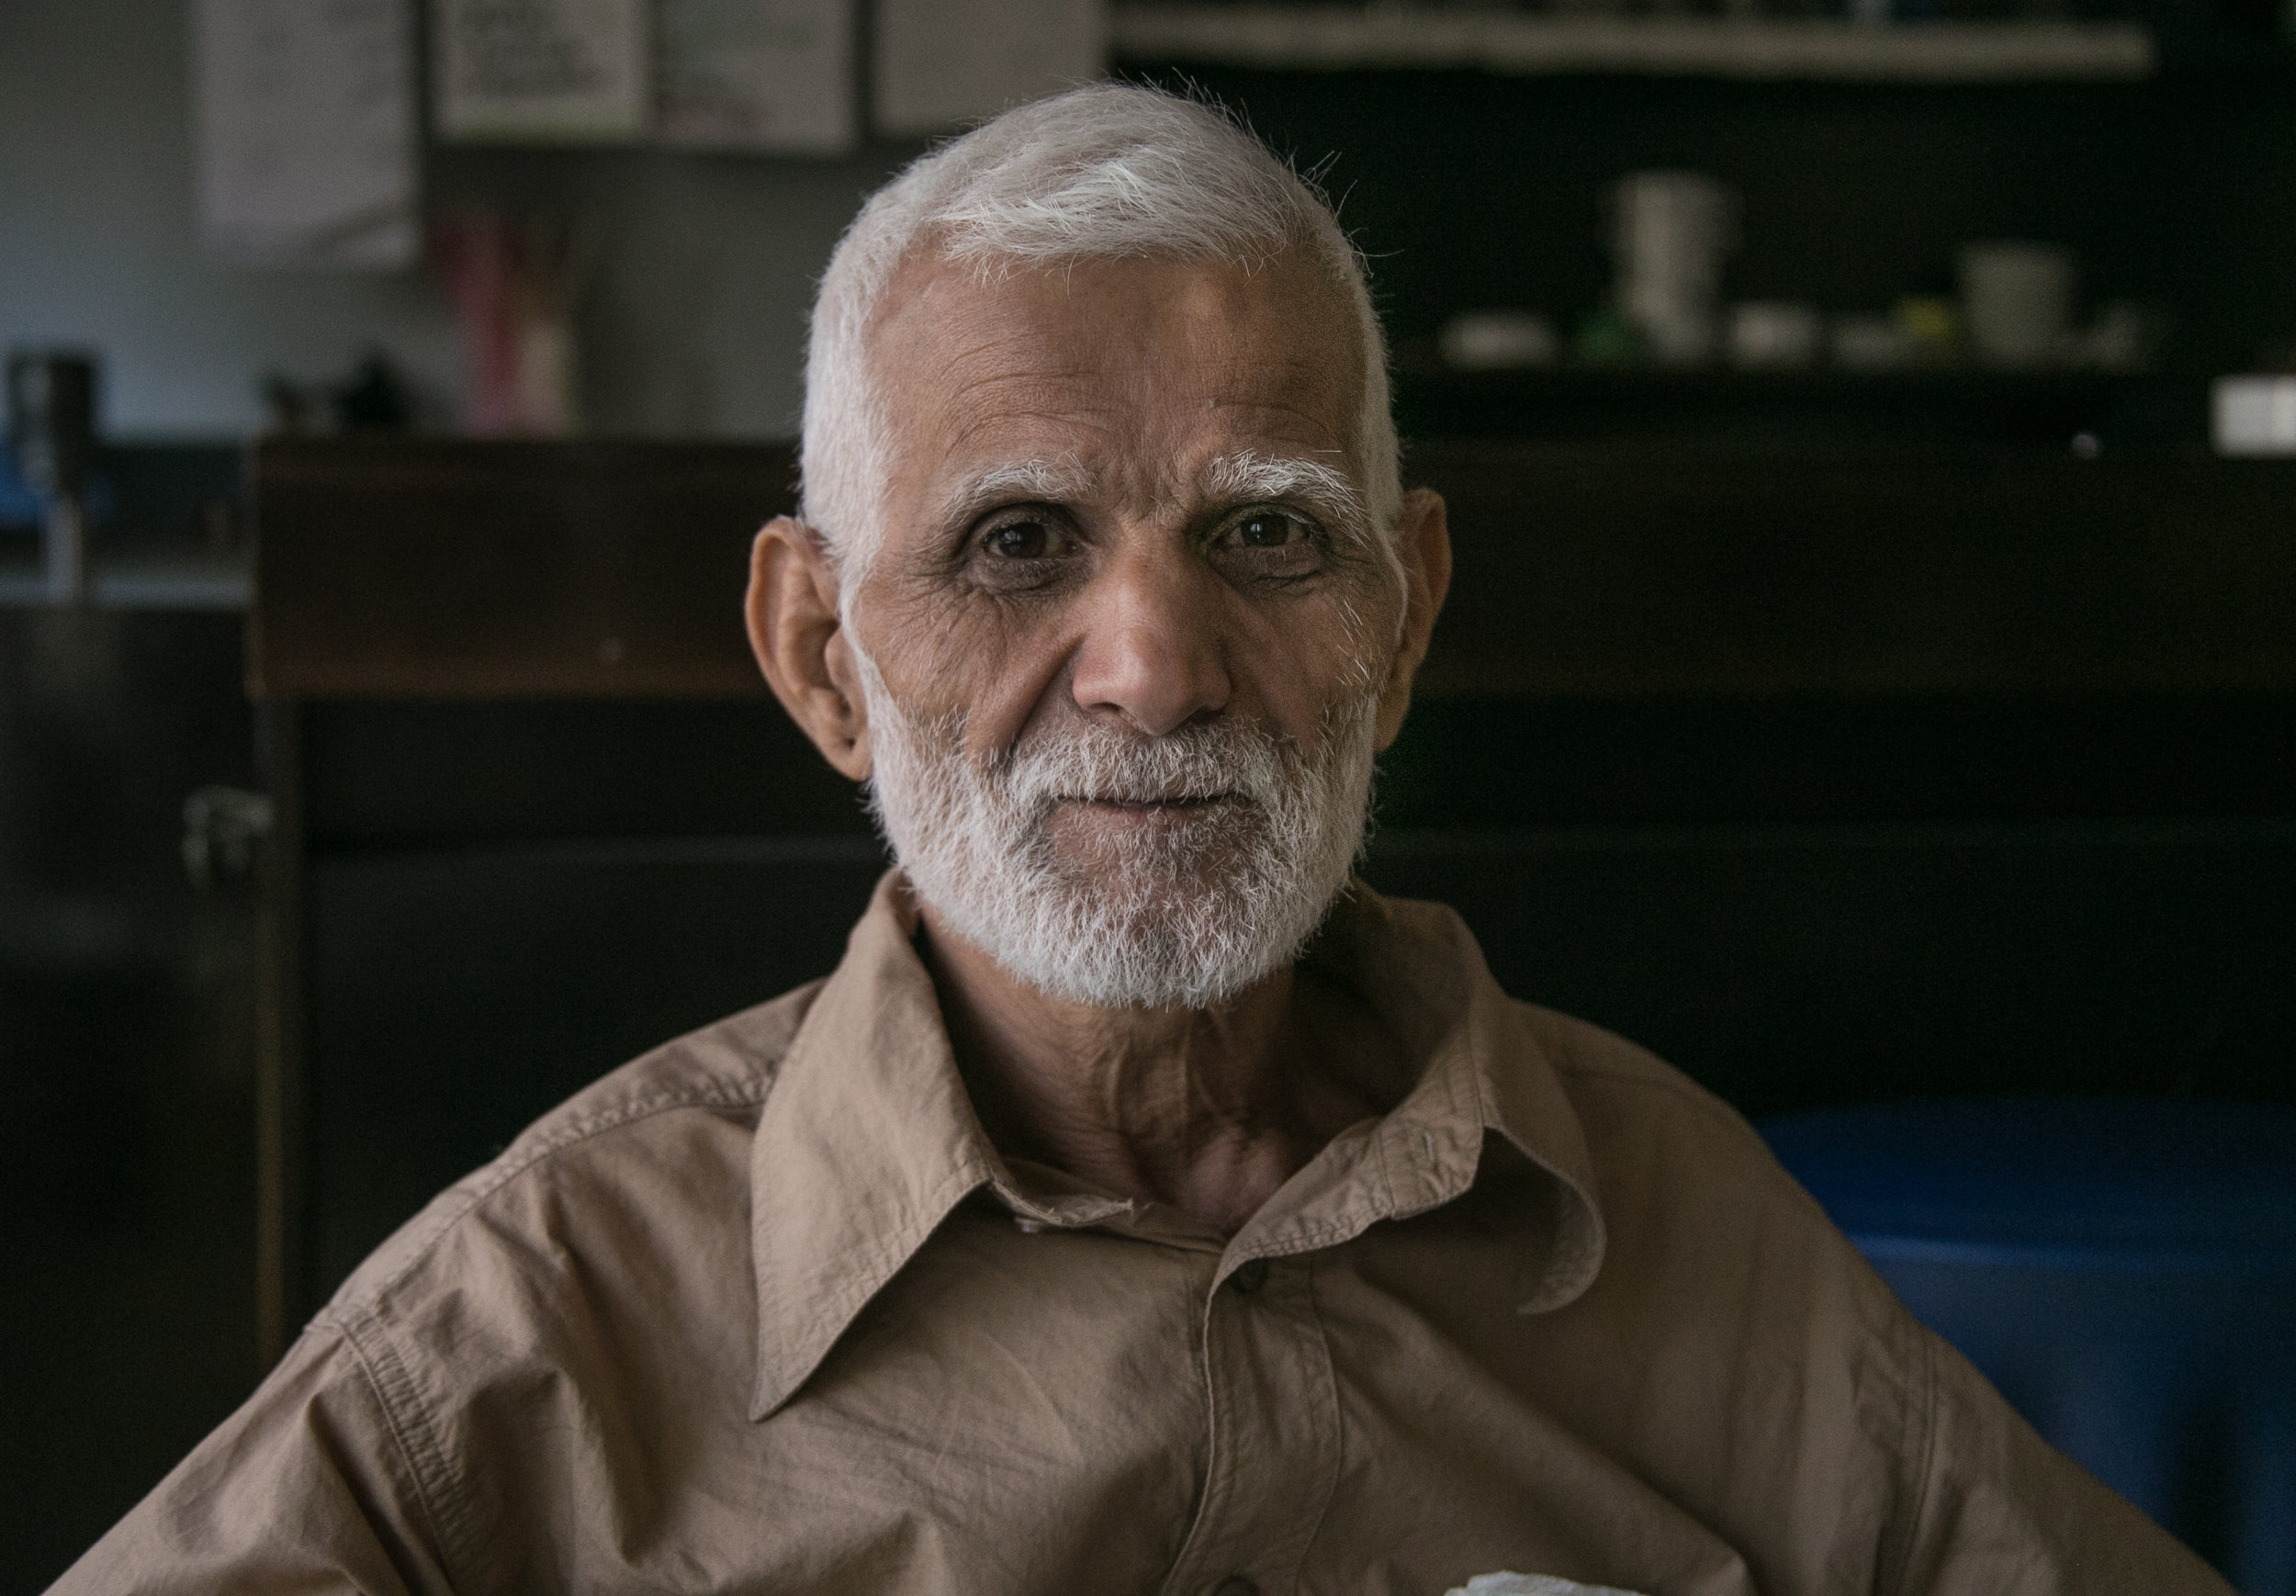  09/26/16 - Hamit M., an Iranian refugee living in City Plaza for four months, sits in the bar area before dinner. Hamit often assists in the kitchen and cafeteria area. On this day he arranged all the chairs and tables in preparation for dinner. 